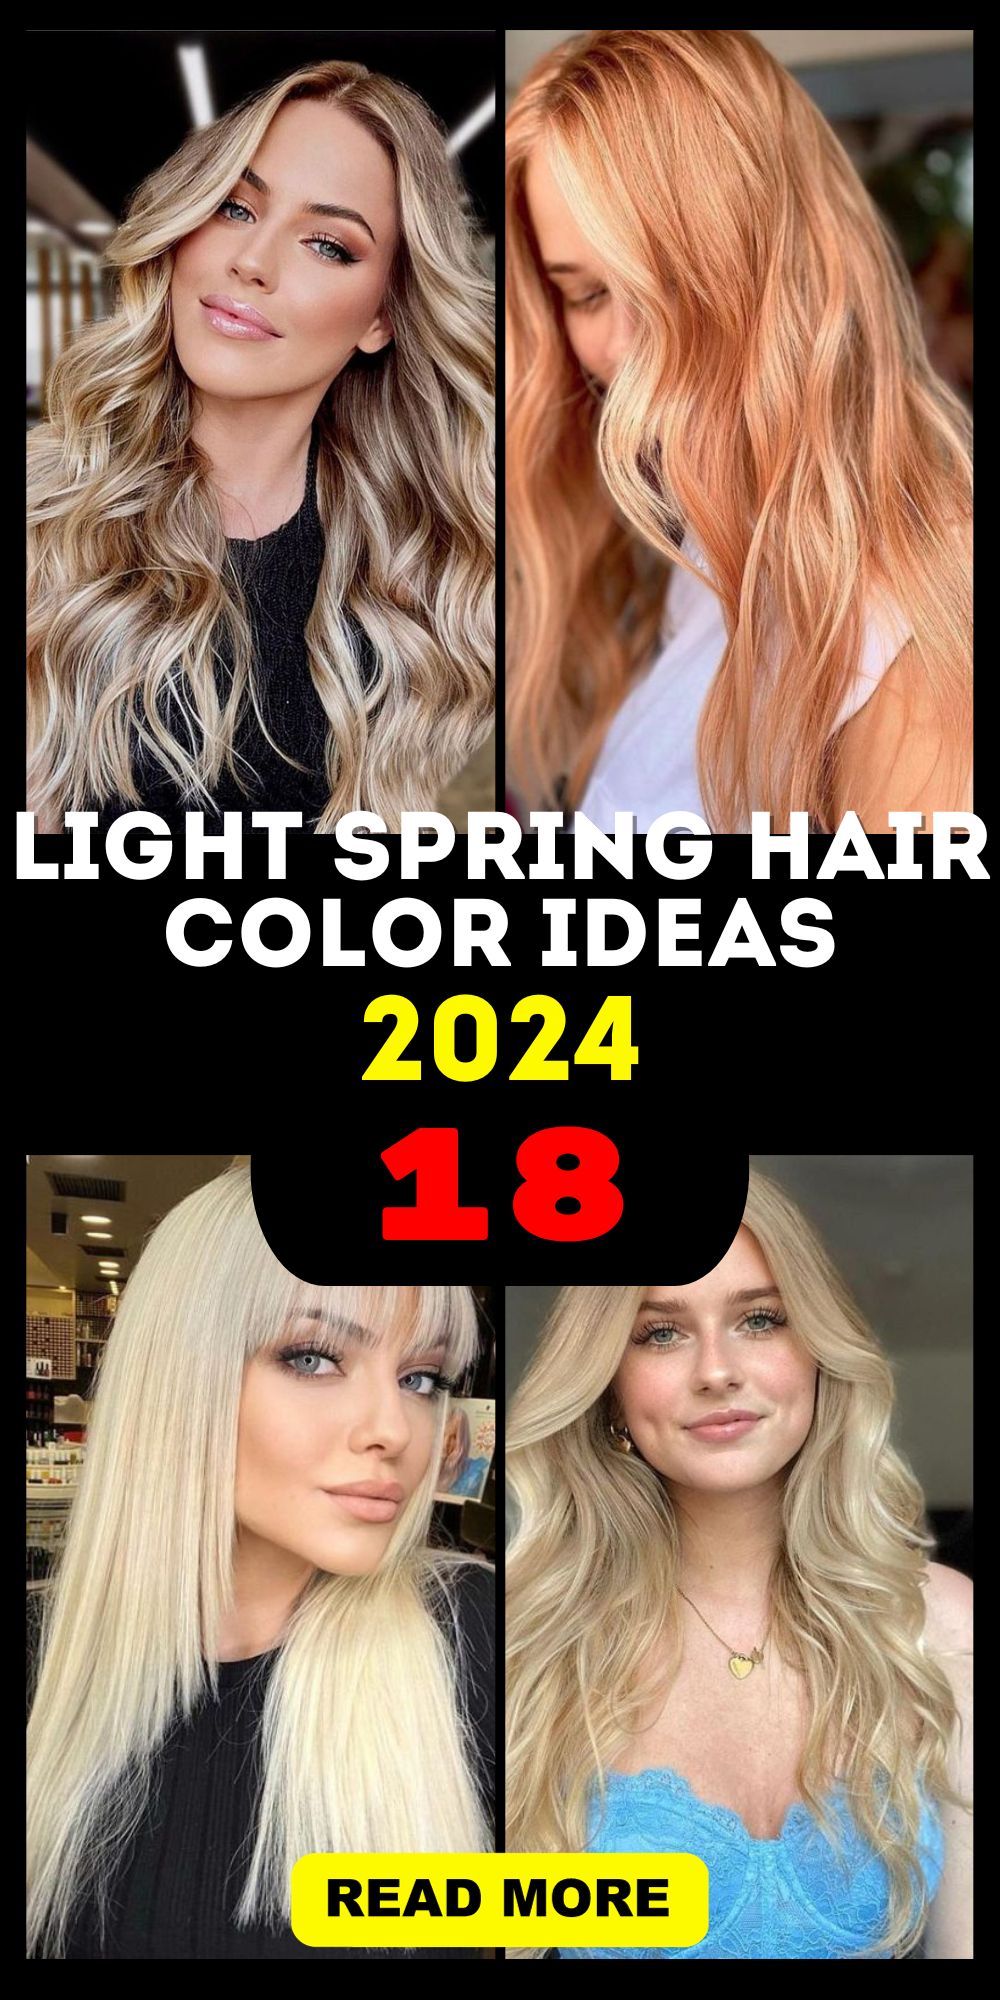 Light Spring Hair Color 2024 Unveil Trending Shades and Styles